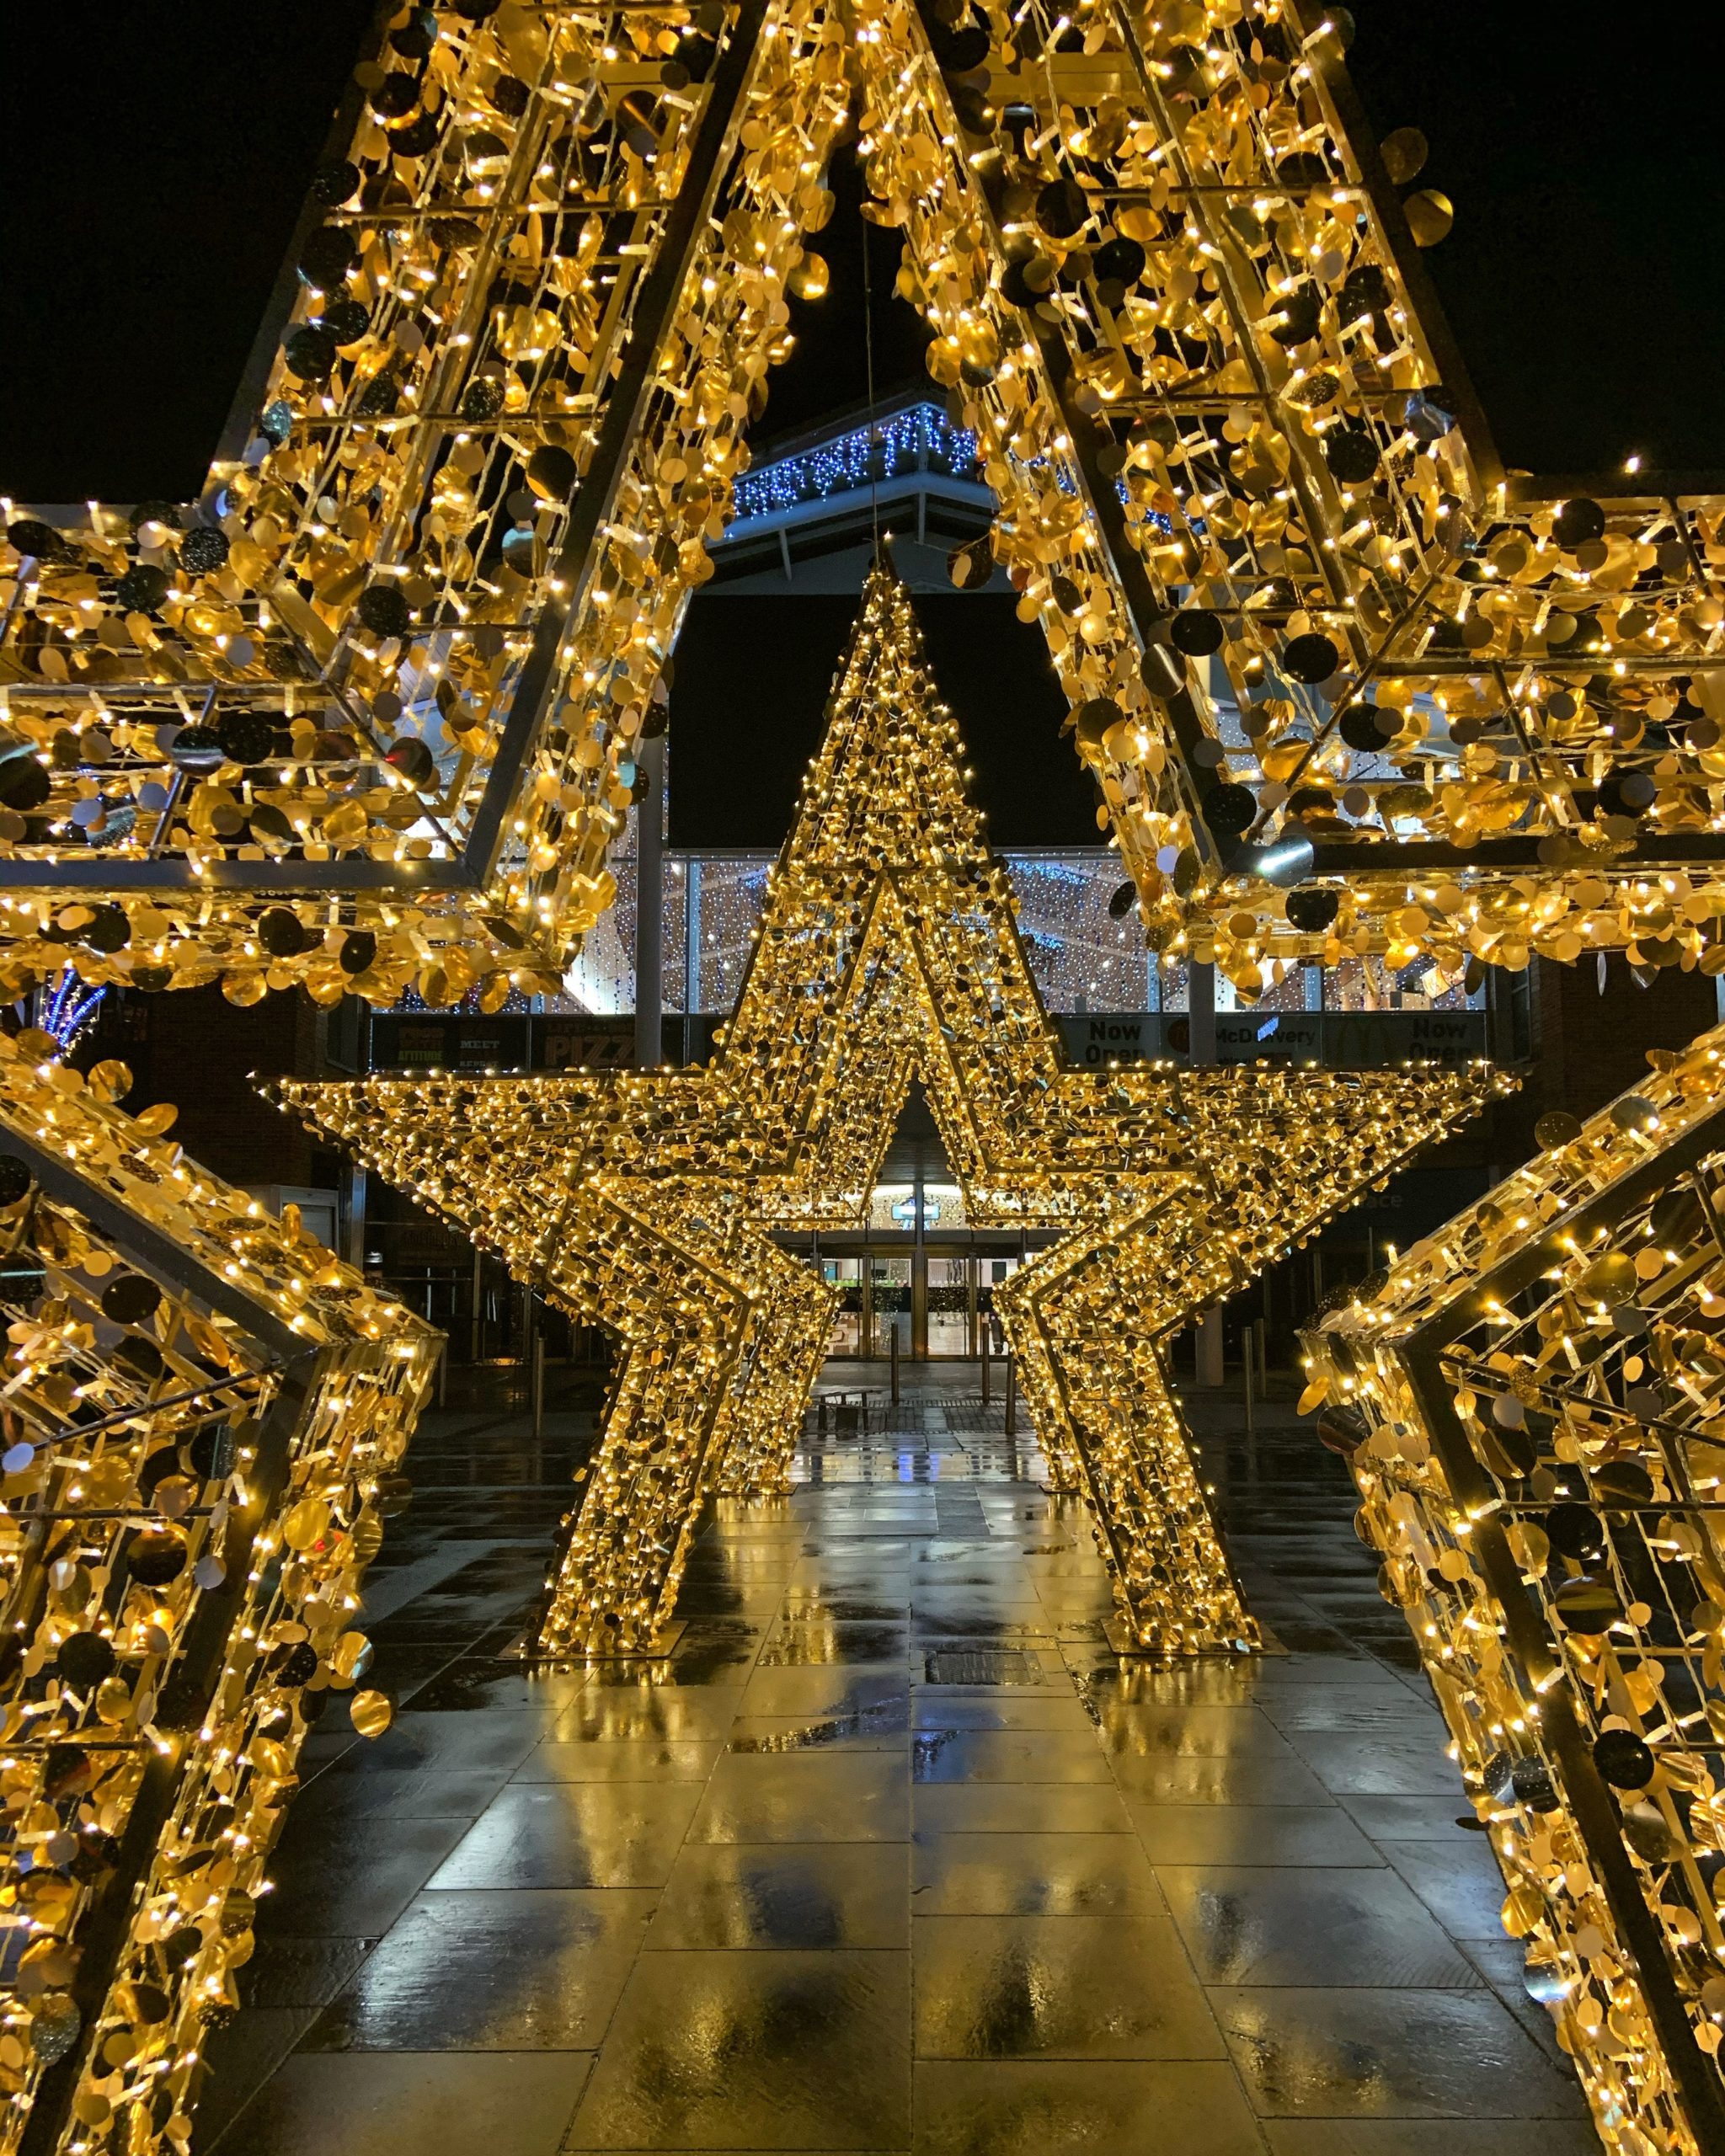 Three Light-up Gold Star Motifs displayed as a selfie point outside a shopping centre Christmas display.